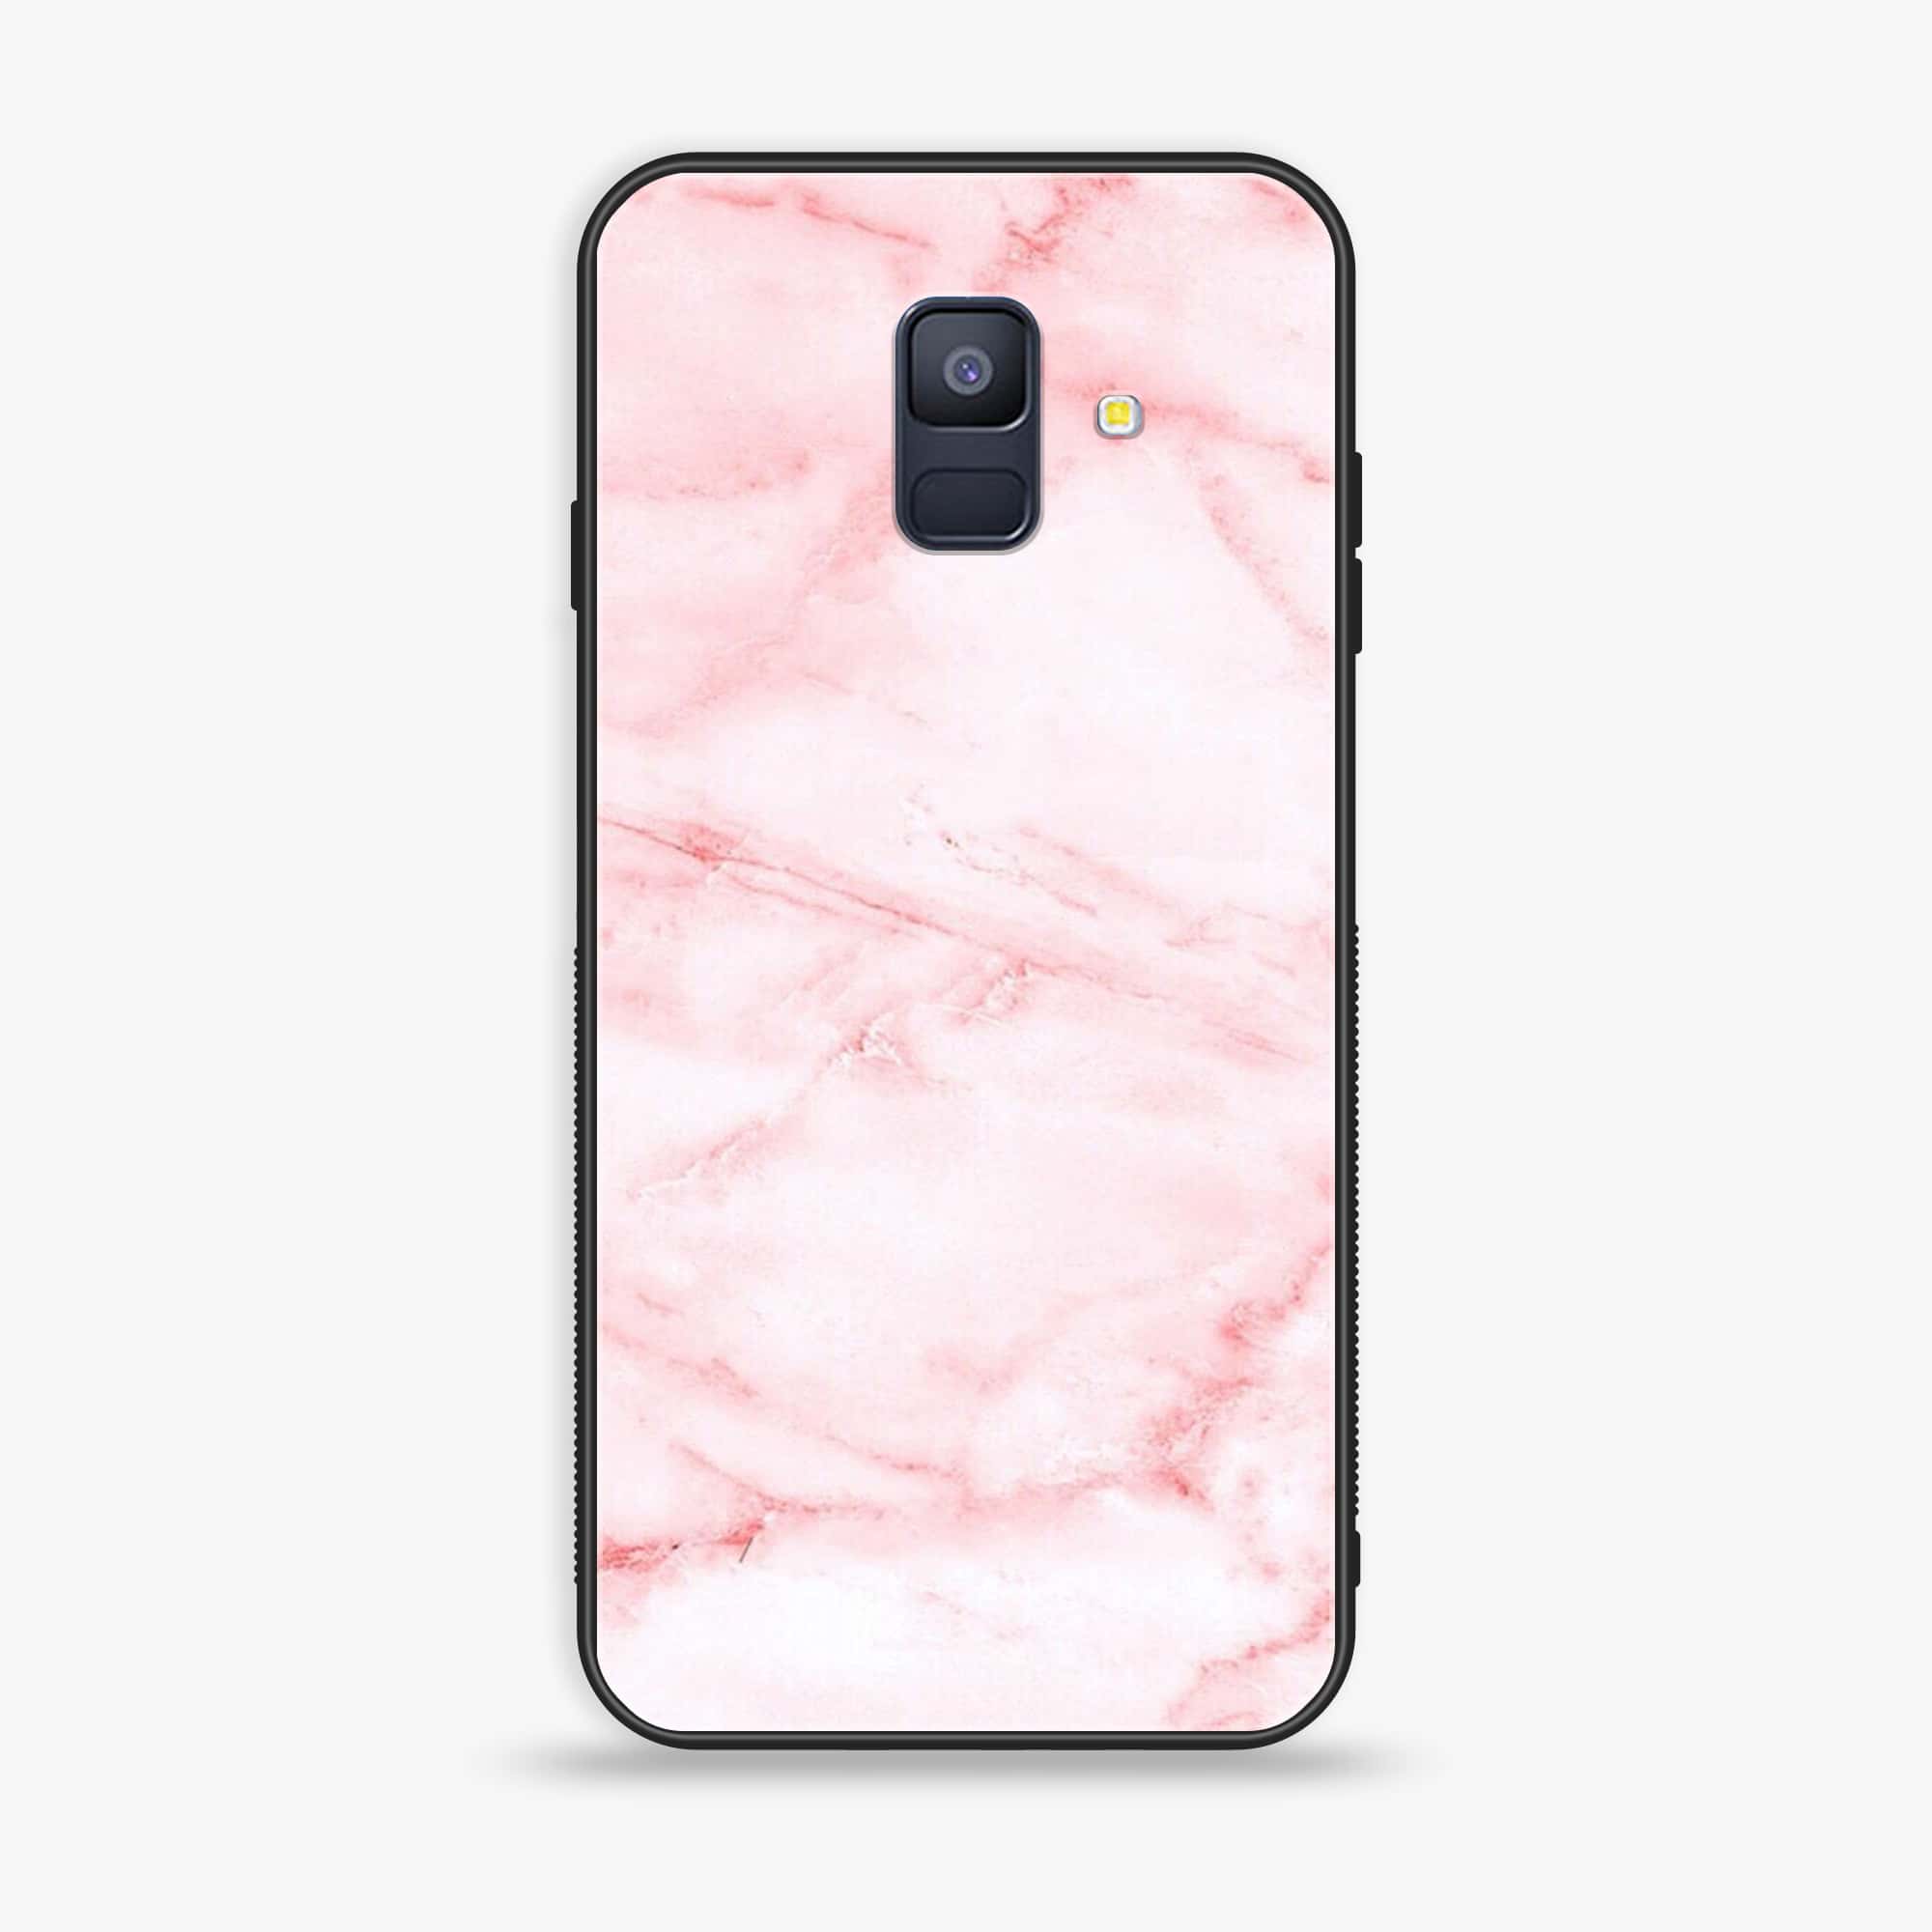 Samsung Galaxy A6 (2018) - Pink Marble Series - Premium Printed Glass soft Bumper shock Proof Case